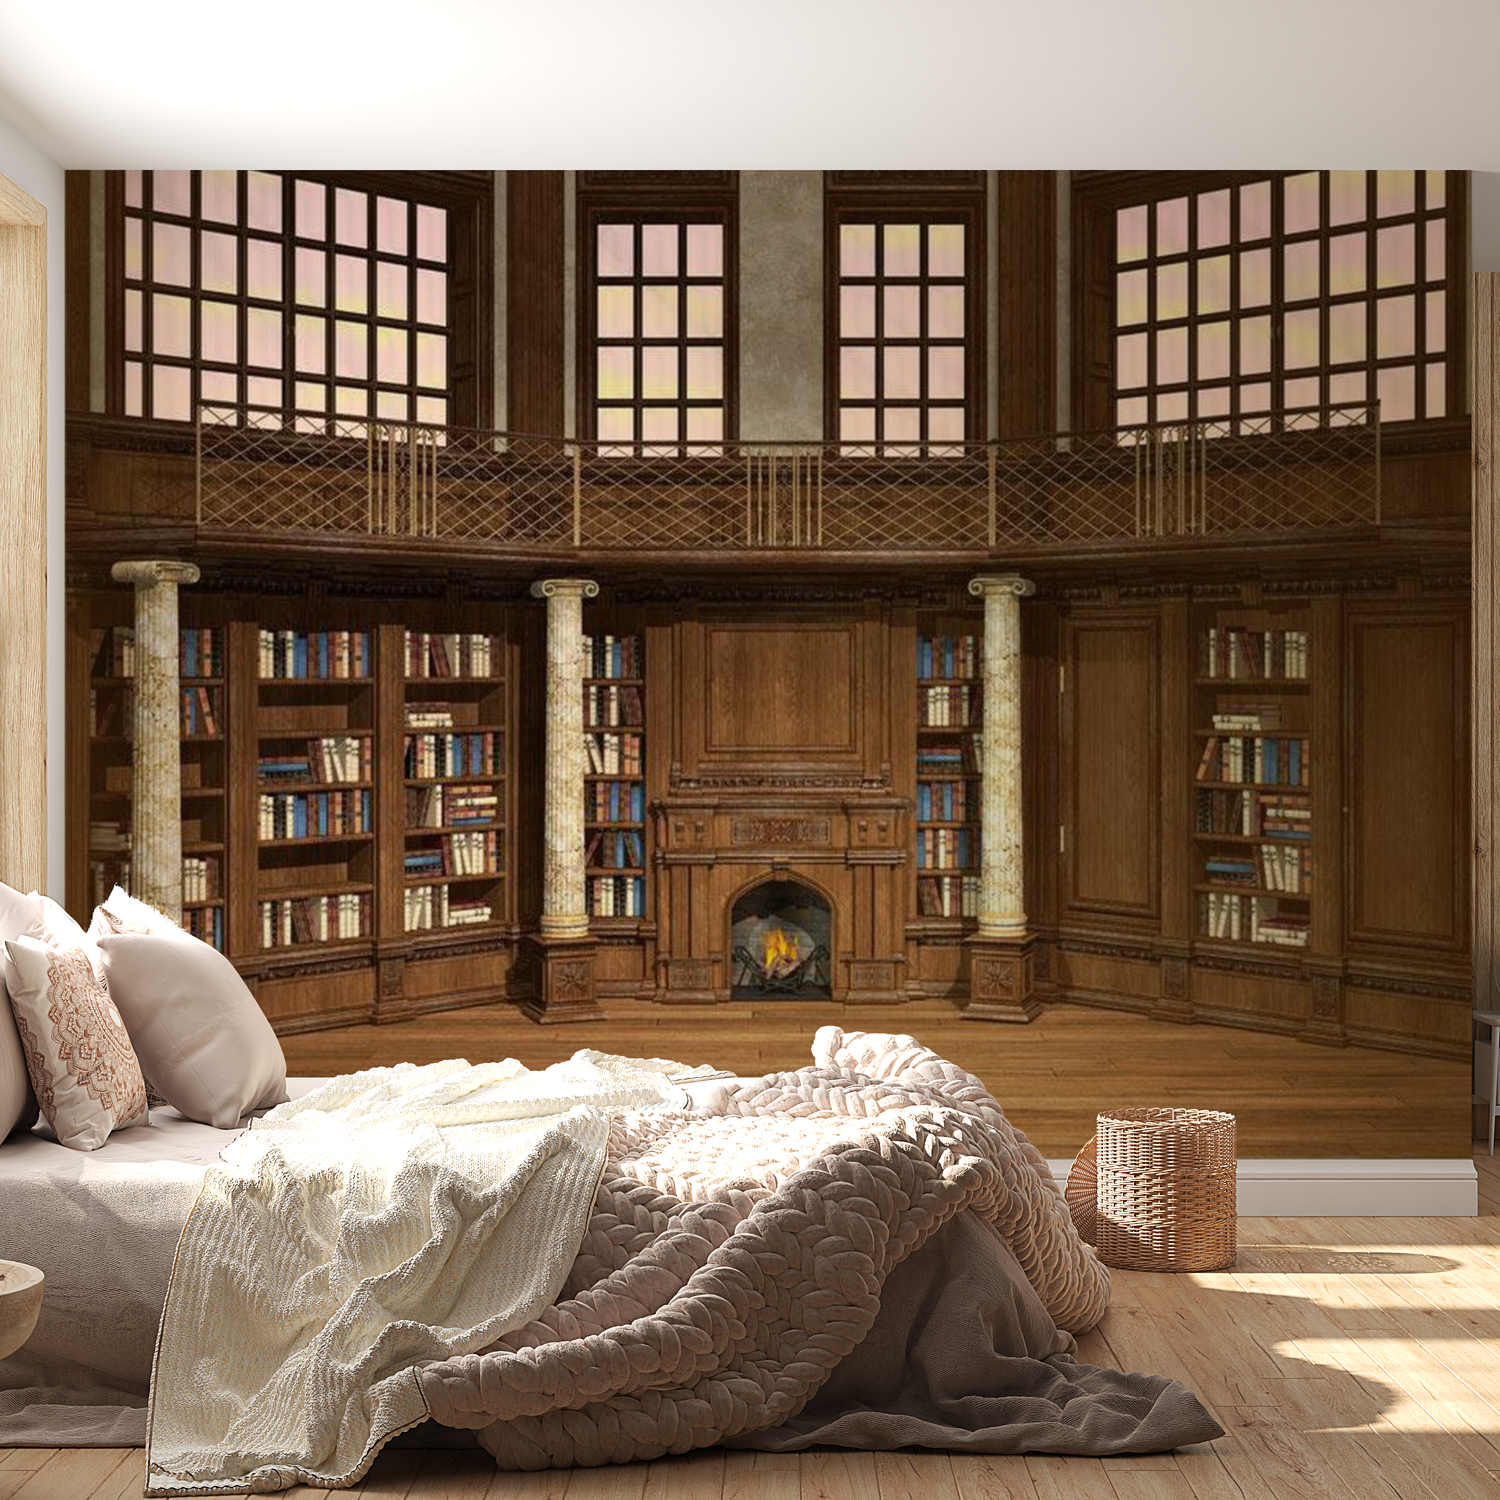 3D Illusion Wallpaper Wall Mural - Library Of Dreams 39"Wx27"H